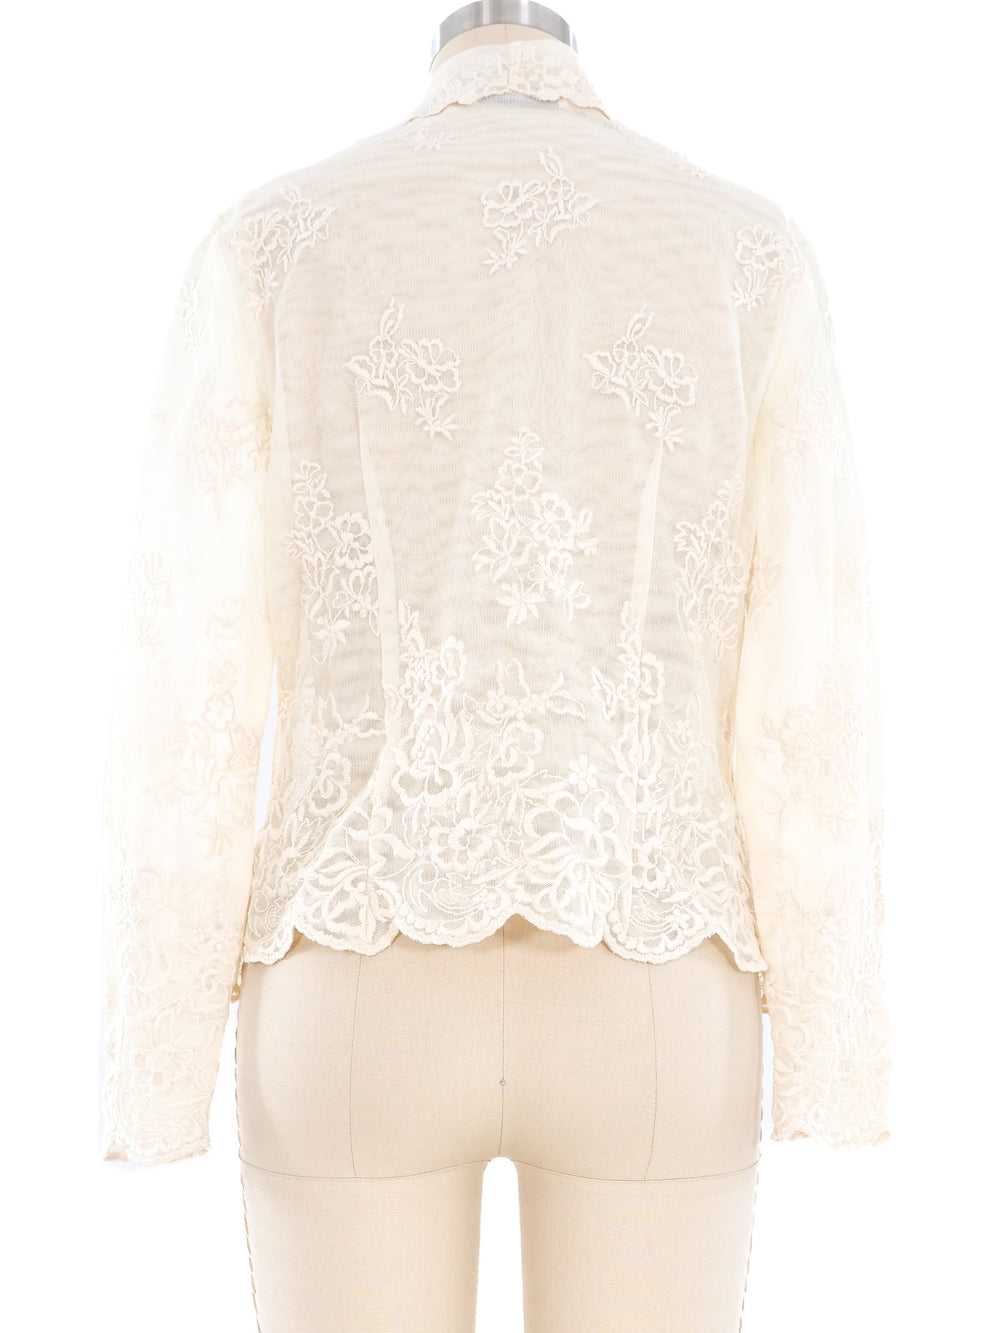 Ivory Floral Lace Blouse - image 4